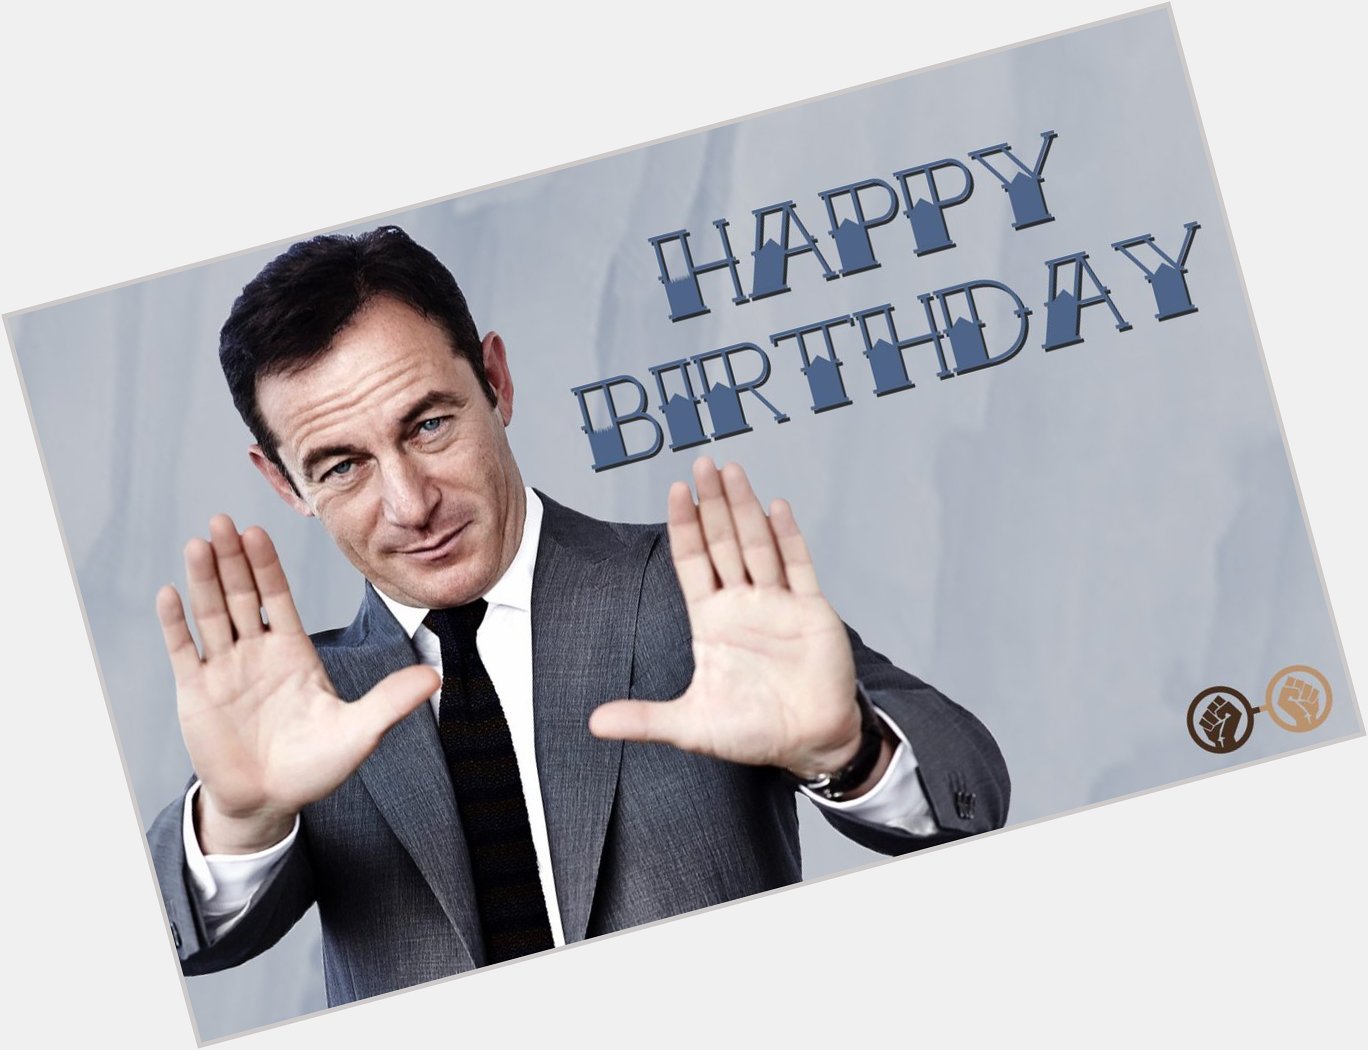 Happy birthday to Jason Isaacs! The talented \Harry Potter\ actor turns 55 today! 